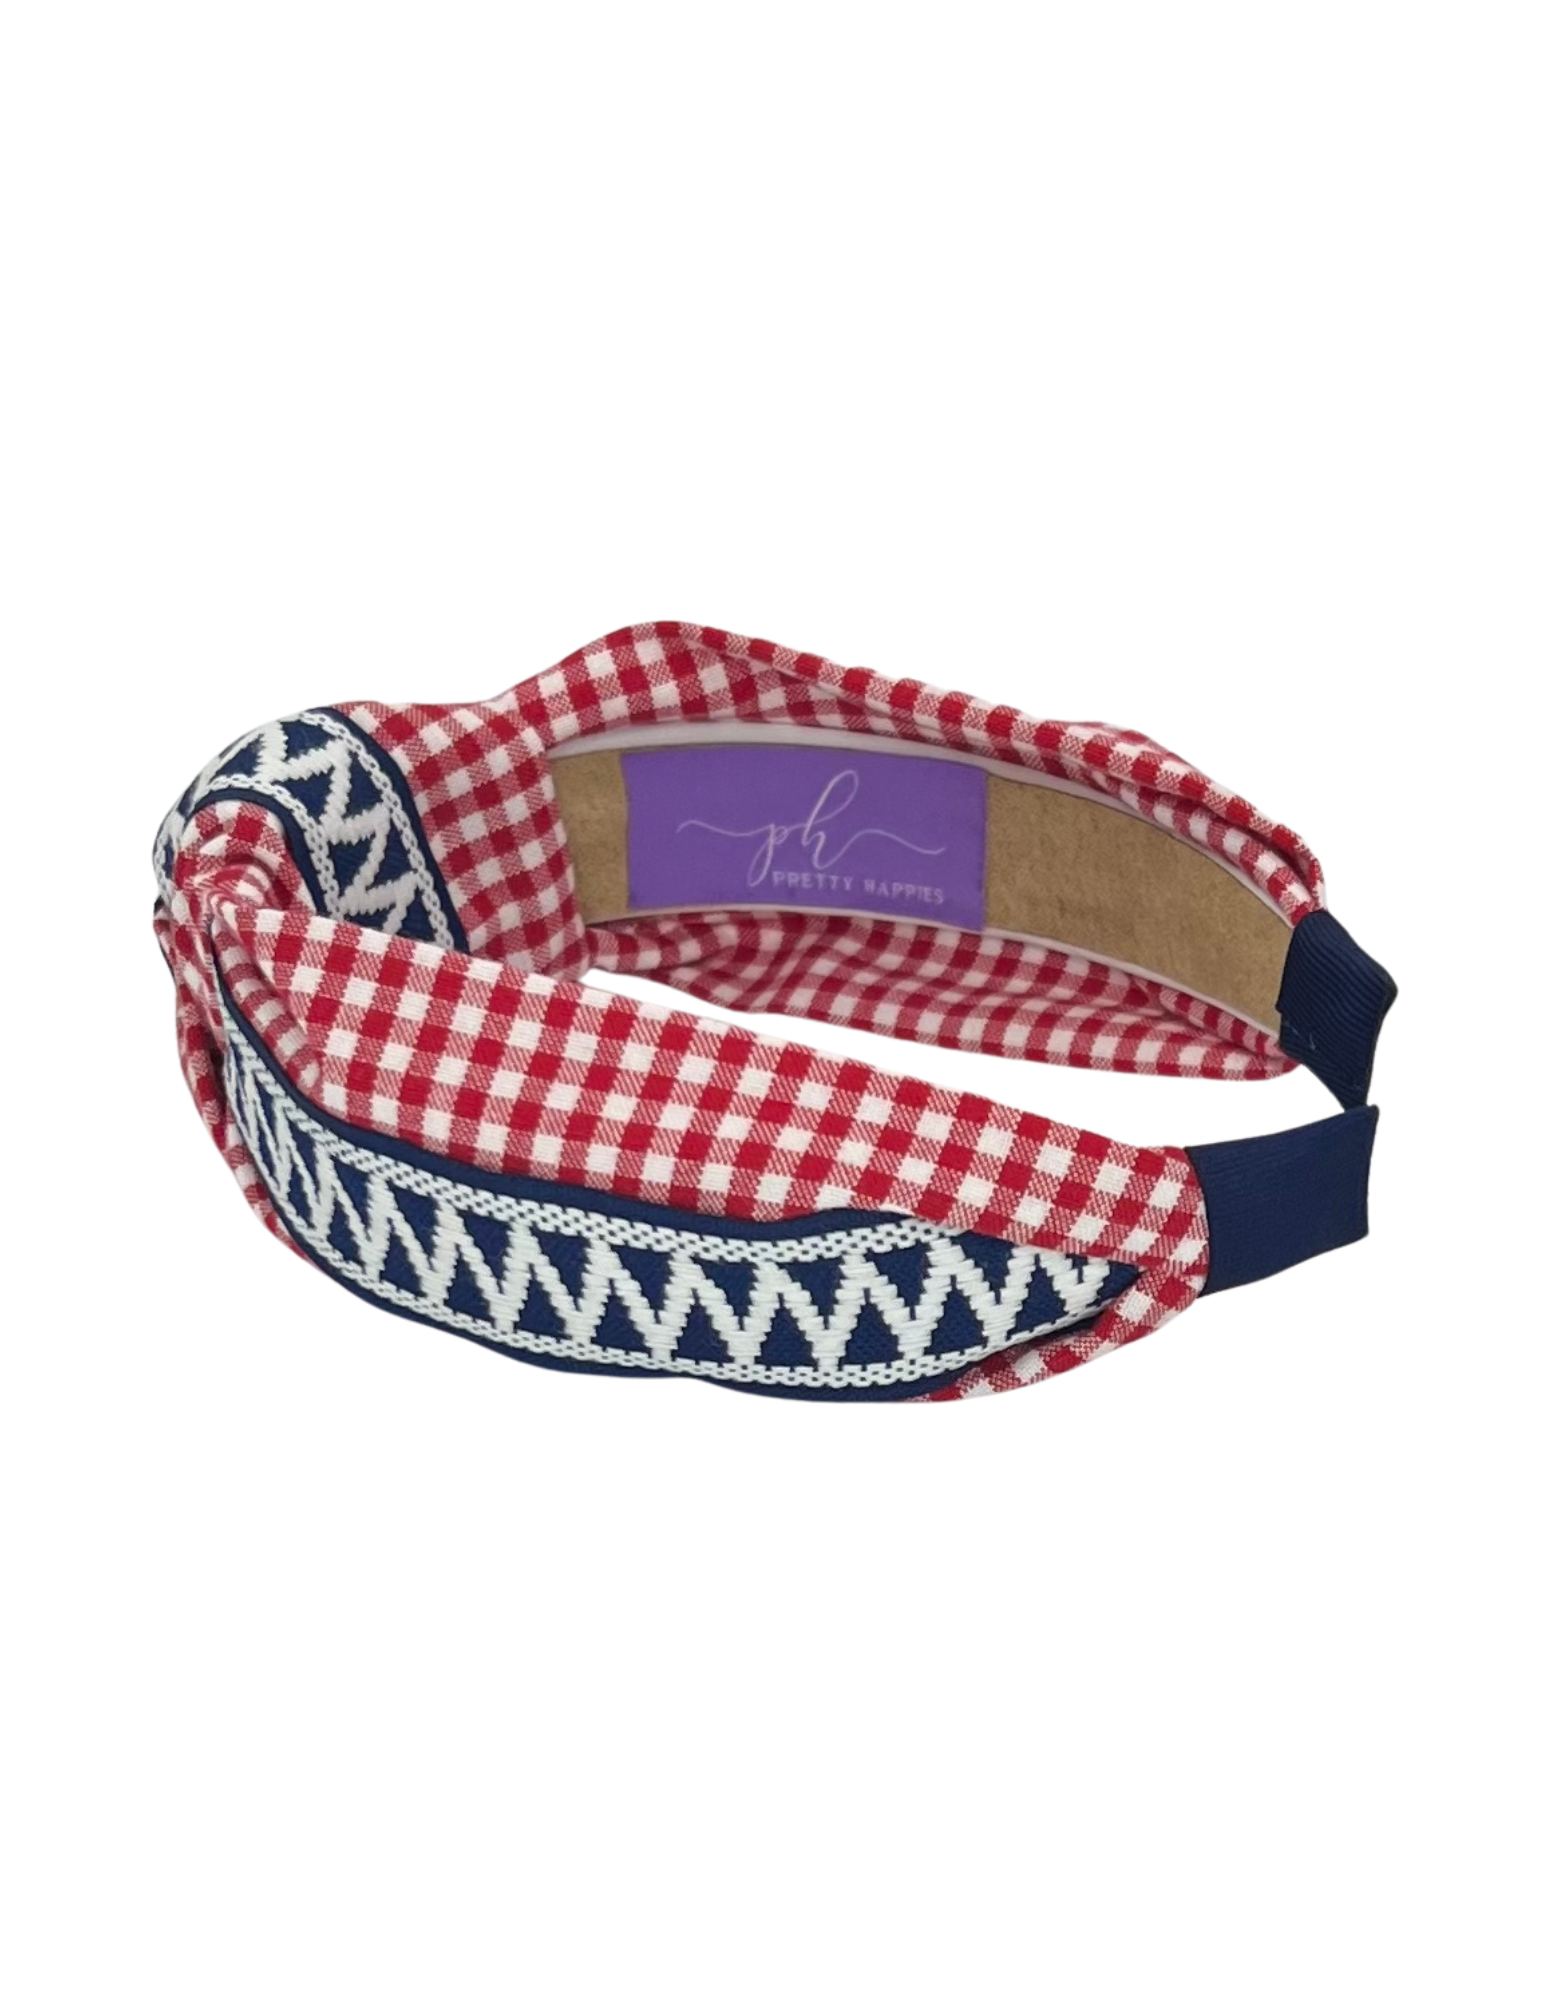 Navy and White Zigzag Ribbon on Red Gingham